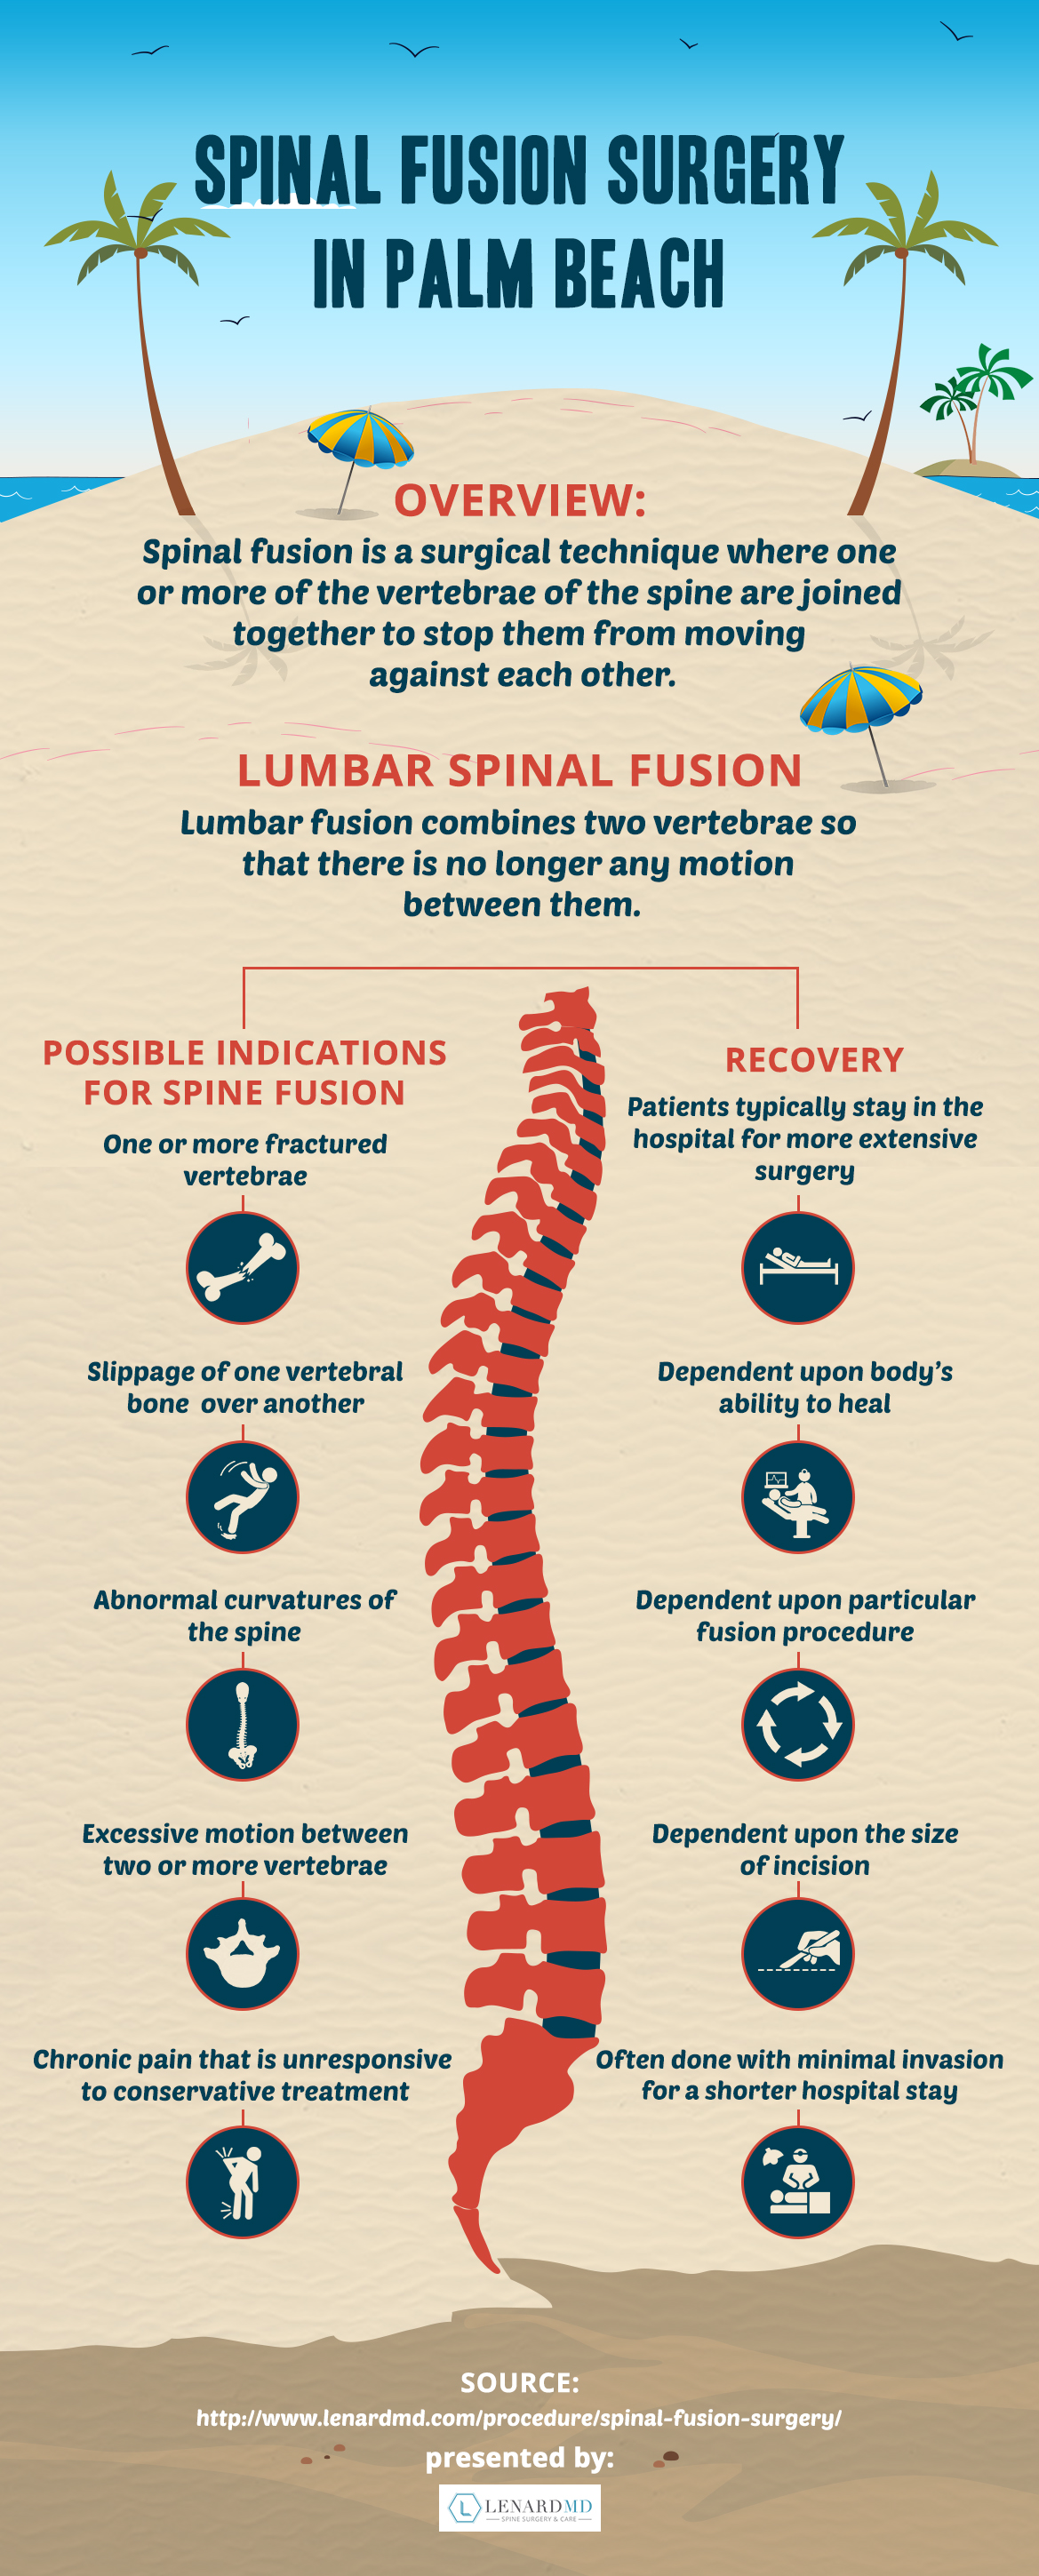 Spine Fusion Surgery in Palm Beach